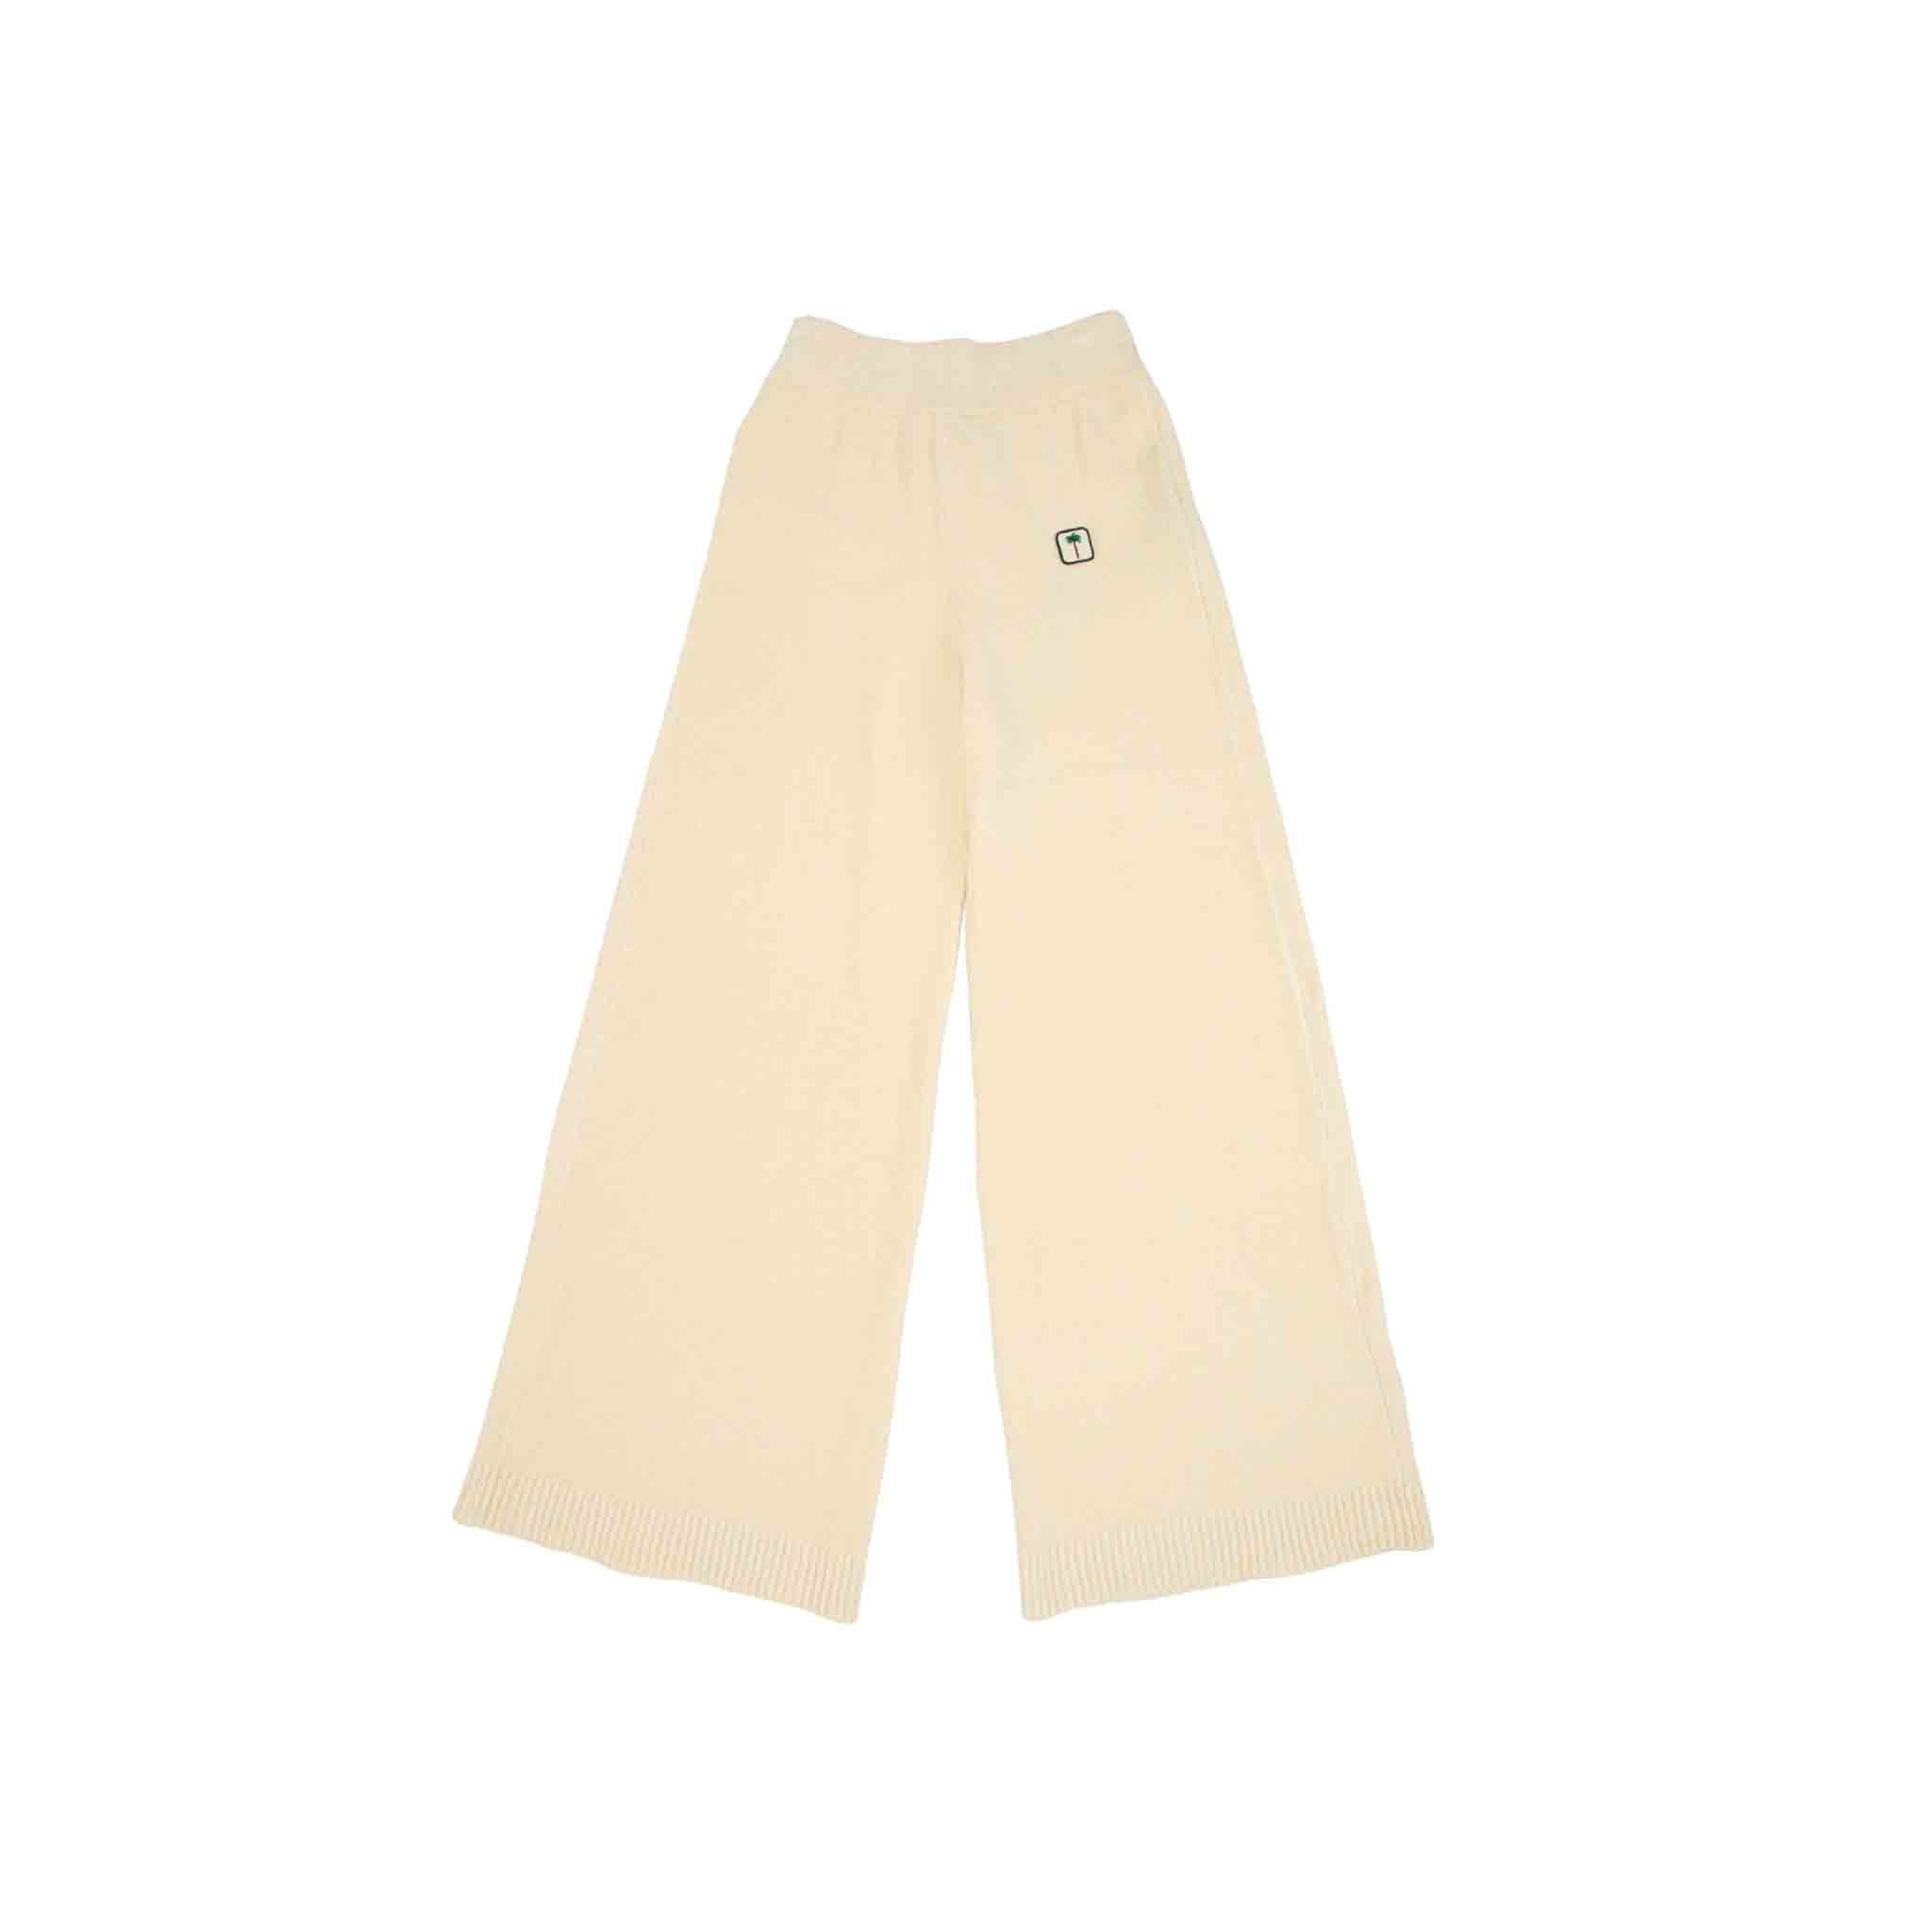 Add some luxe to your casual wardrobe with these Palm Angels track pants. Made from a soft chenille fabric in a crisp off-white shade, these pants are a stylish choice for any occasion. The elasticated waistband and wide leg silhouette provide a comfortable fit, while the logo patch to the side adds a touch of branding. Made from a blend of polyester, viscose, and cotton, these pants are both stylish and comfortable.